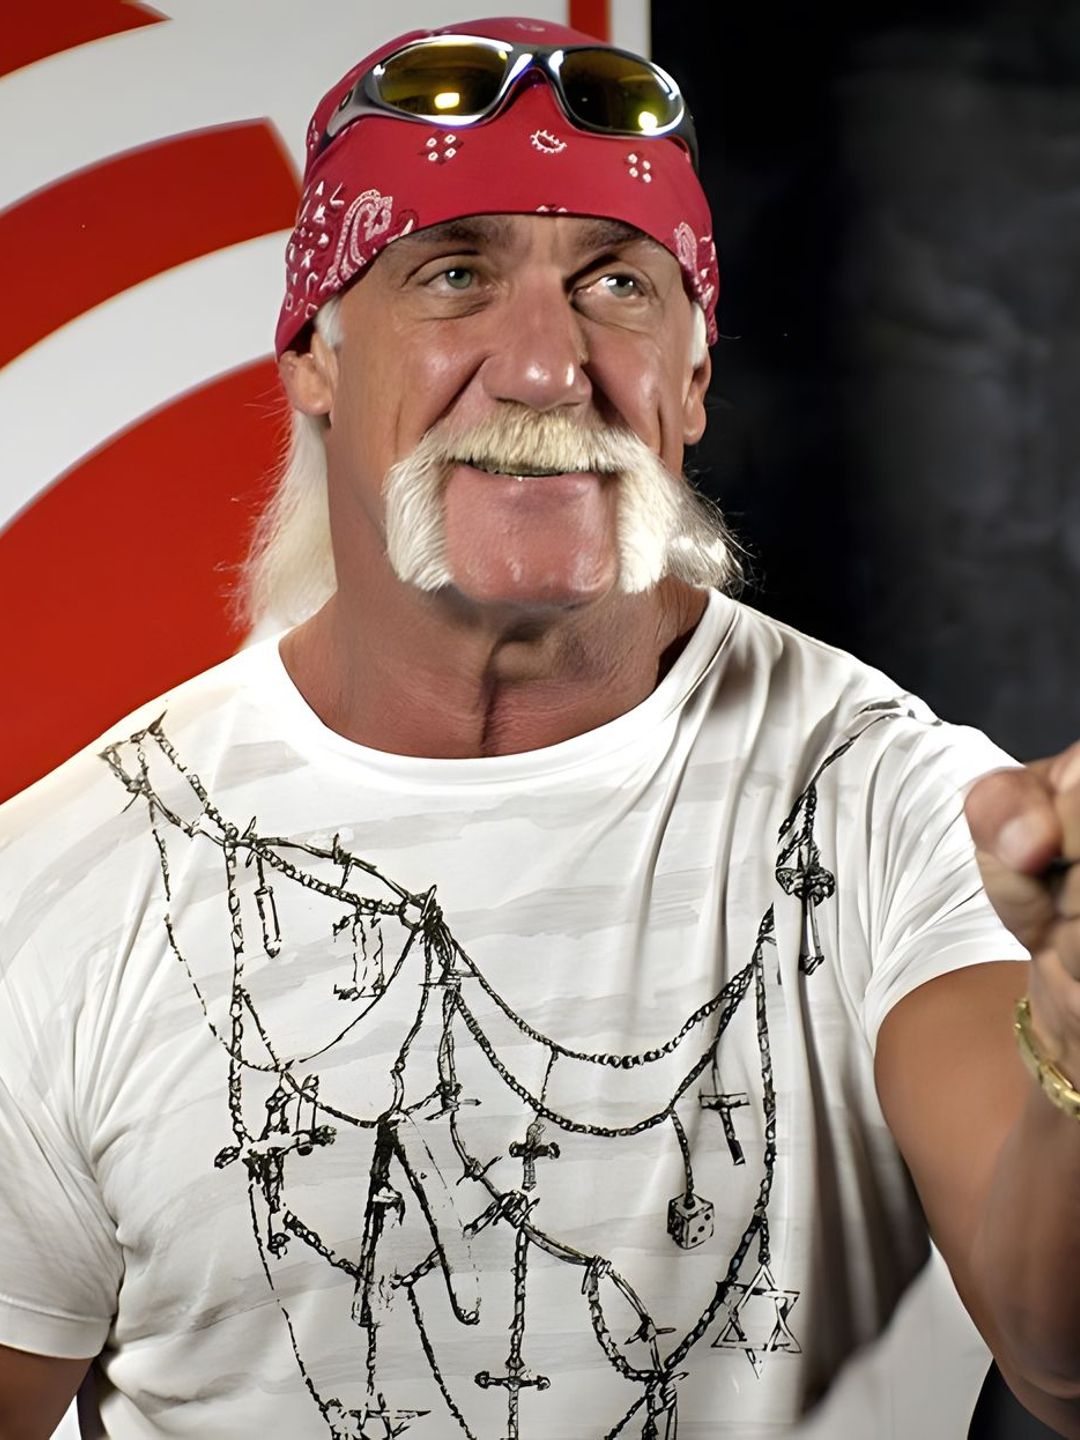 Hulk Hogan who is his mother